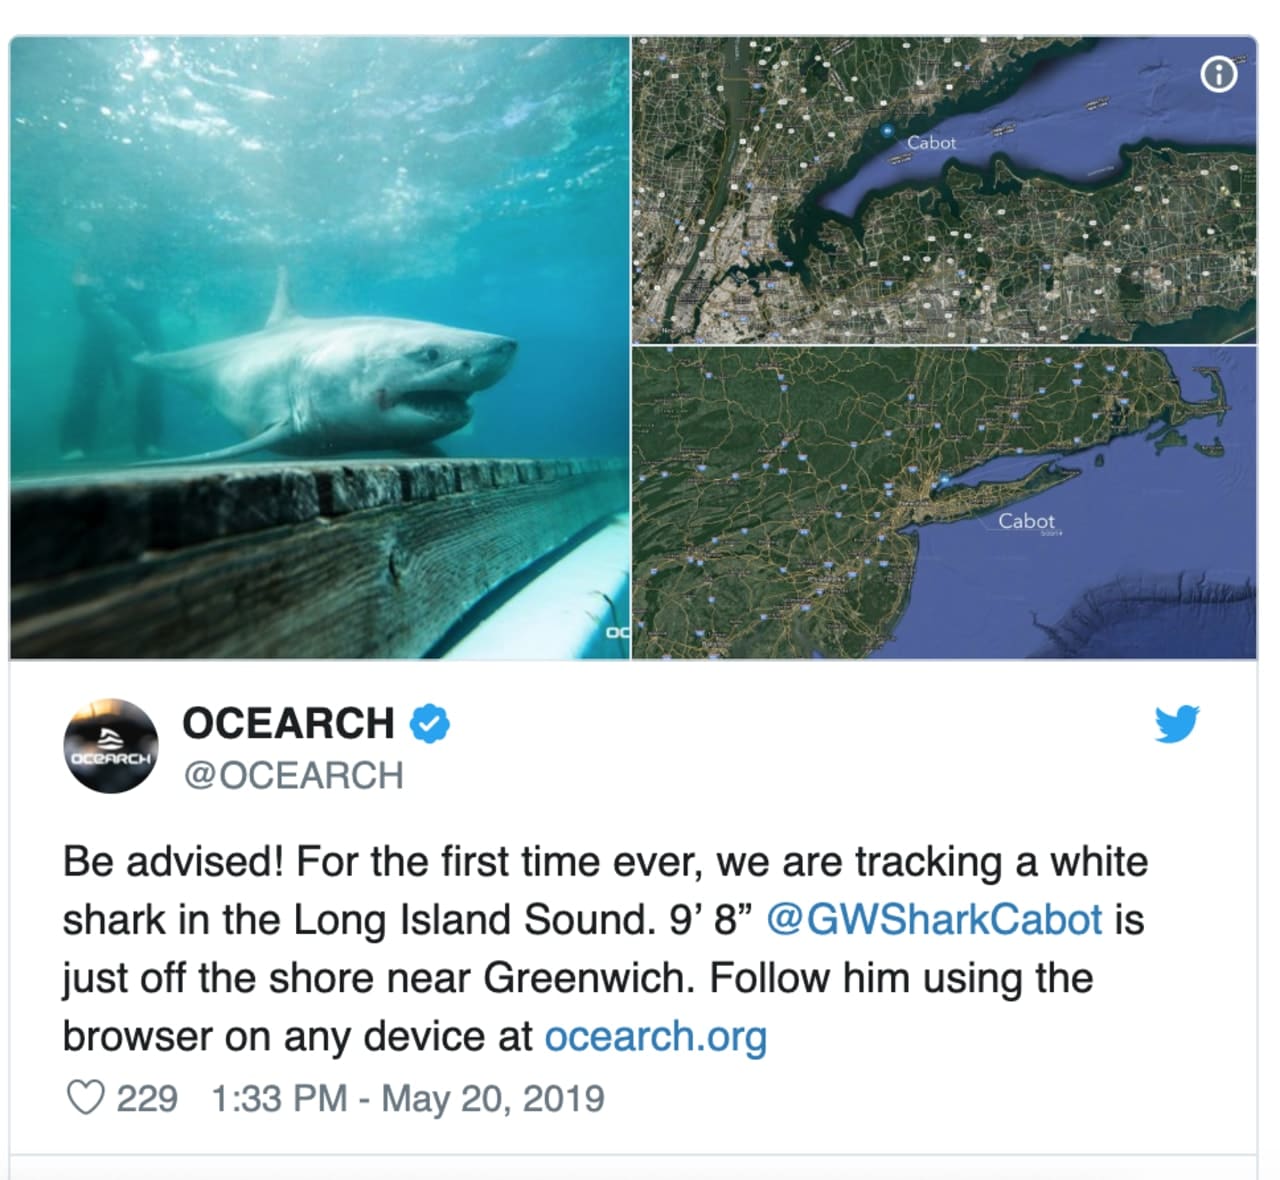 Ocearch.org posted a photo of the great white shark and a map on its Twitter account.